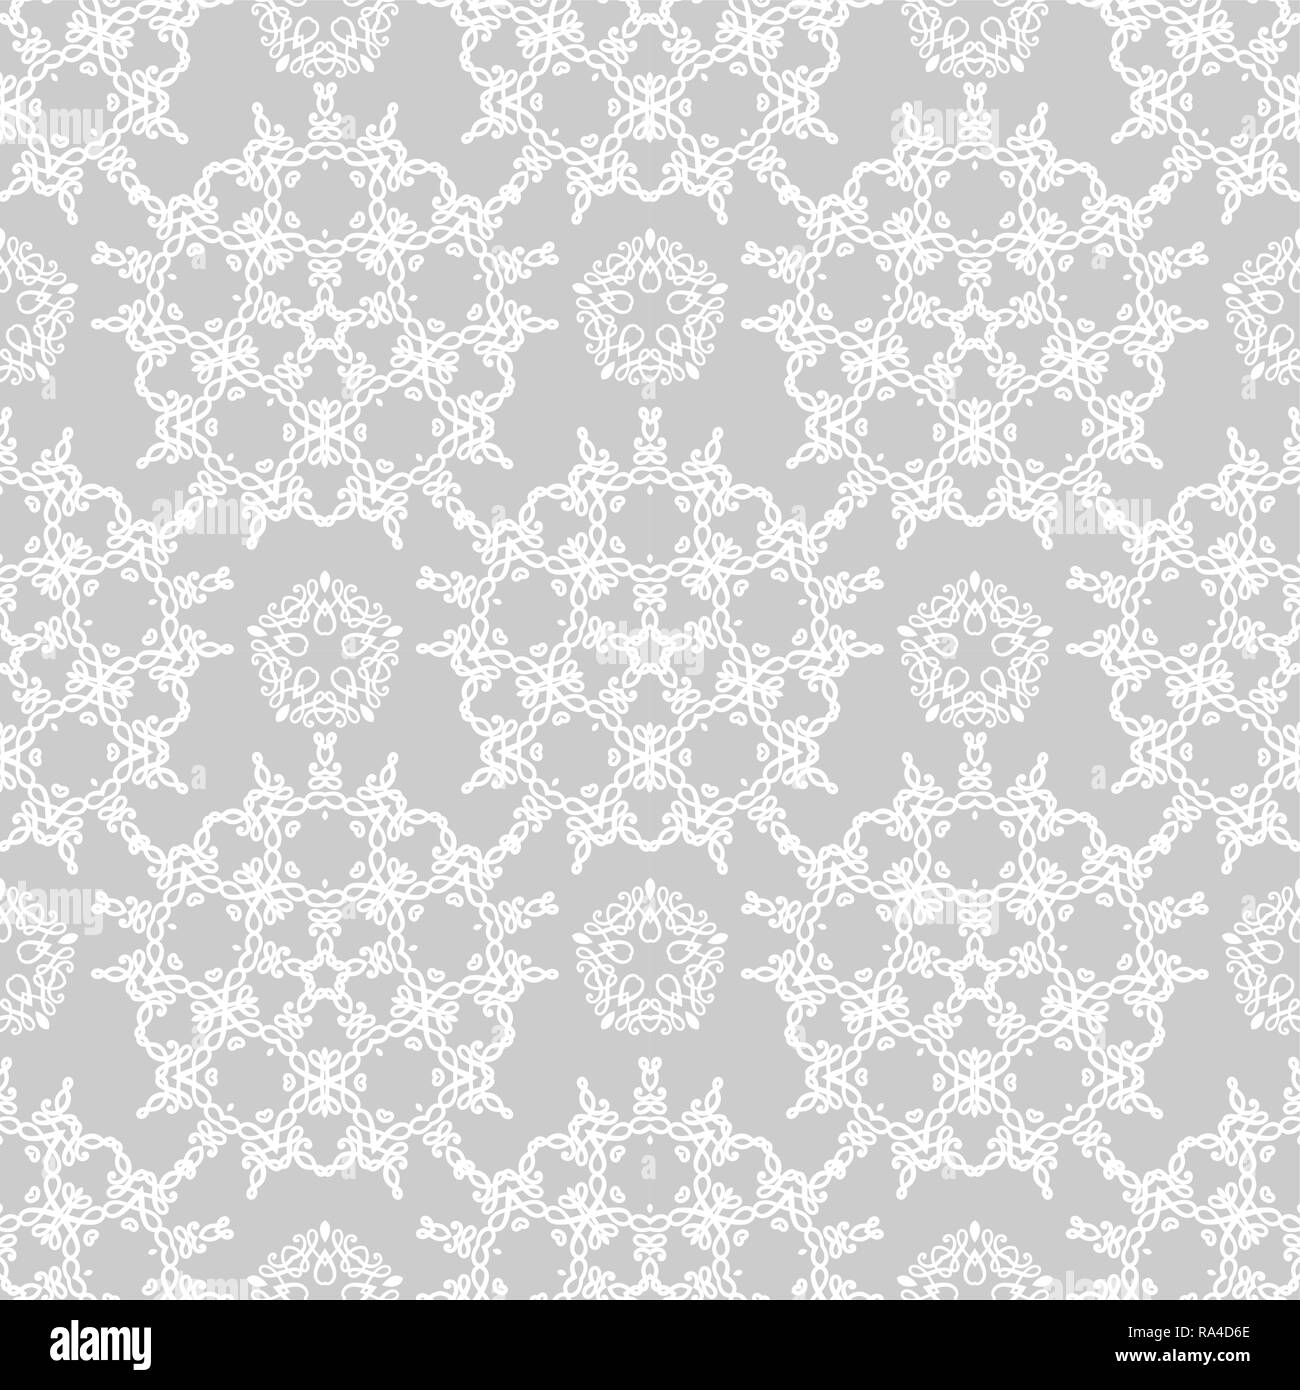 Gray ornamental seamless pattern. Graphic geometry style Stock Vector